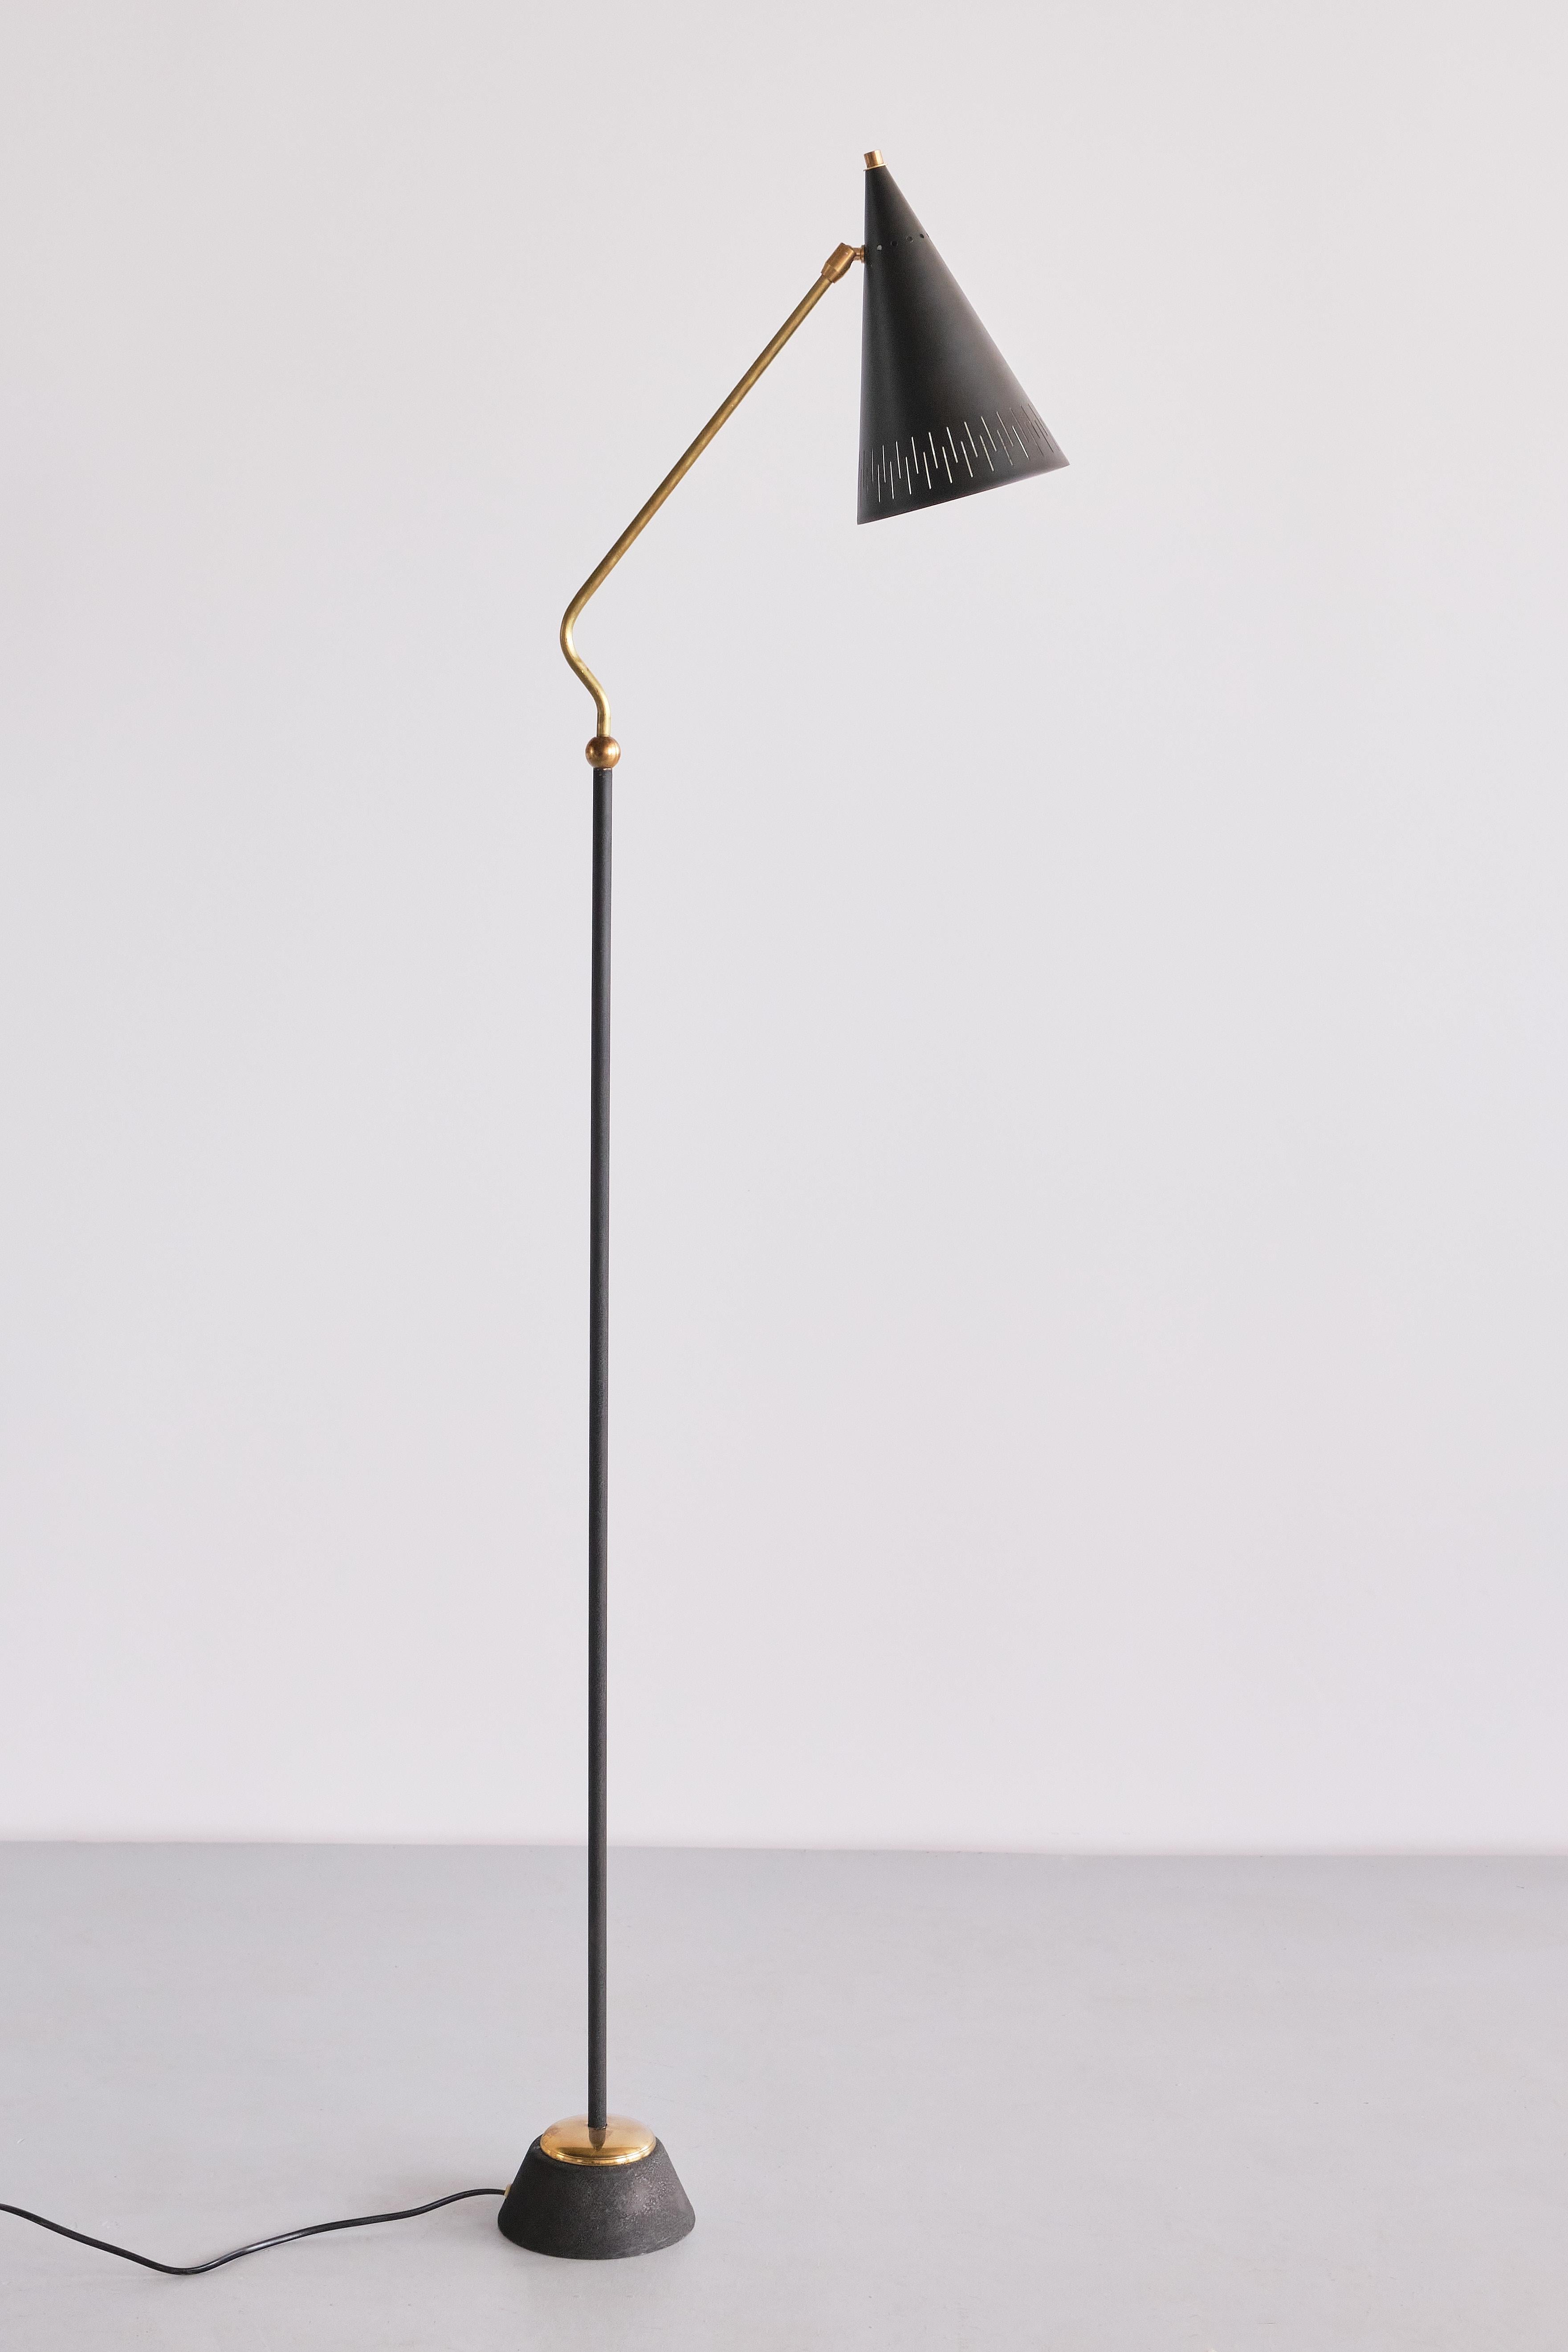 This exceptionally rare Scandinavian Modern floor lamp was produced in Sweden in the 1950s. The design is attributed to Svend Aage Holm-Sørensen who designed different models for the Swedish manufacturer ASEA.

The elegant design is marked by the